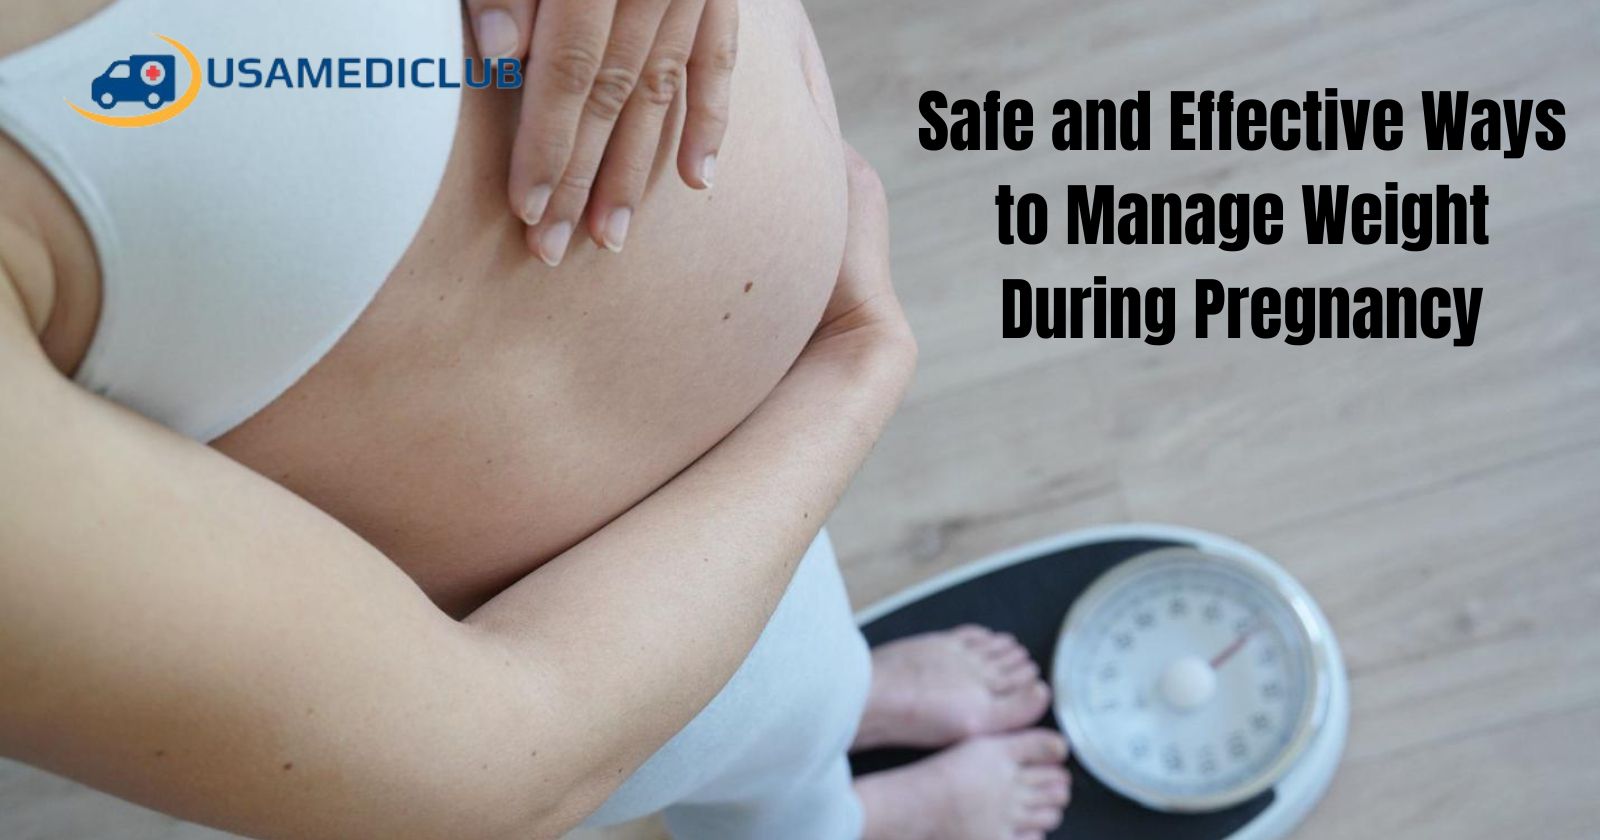 Safe and Effective Ways to Manage Weight During Pregnancy